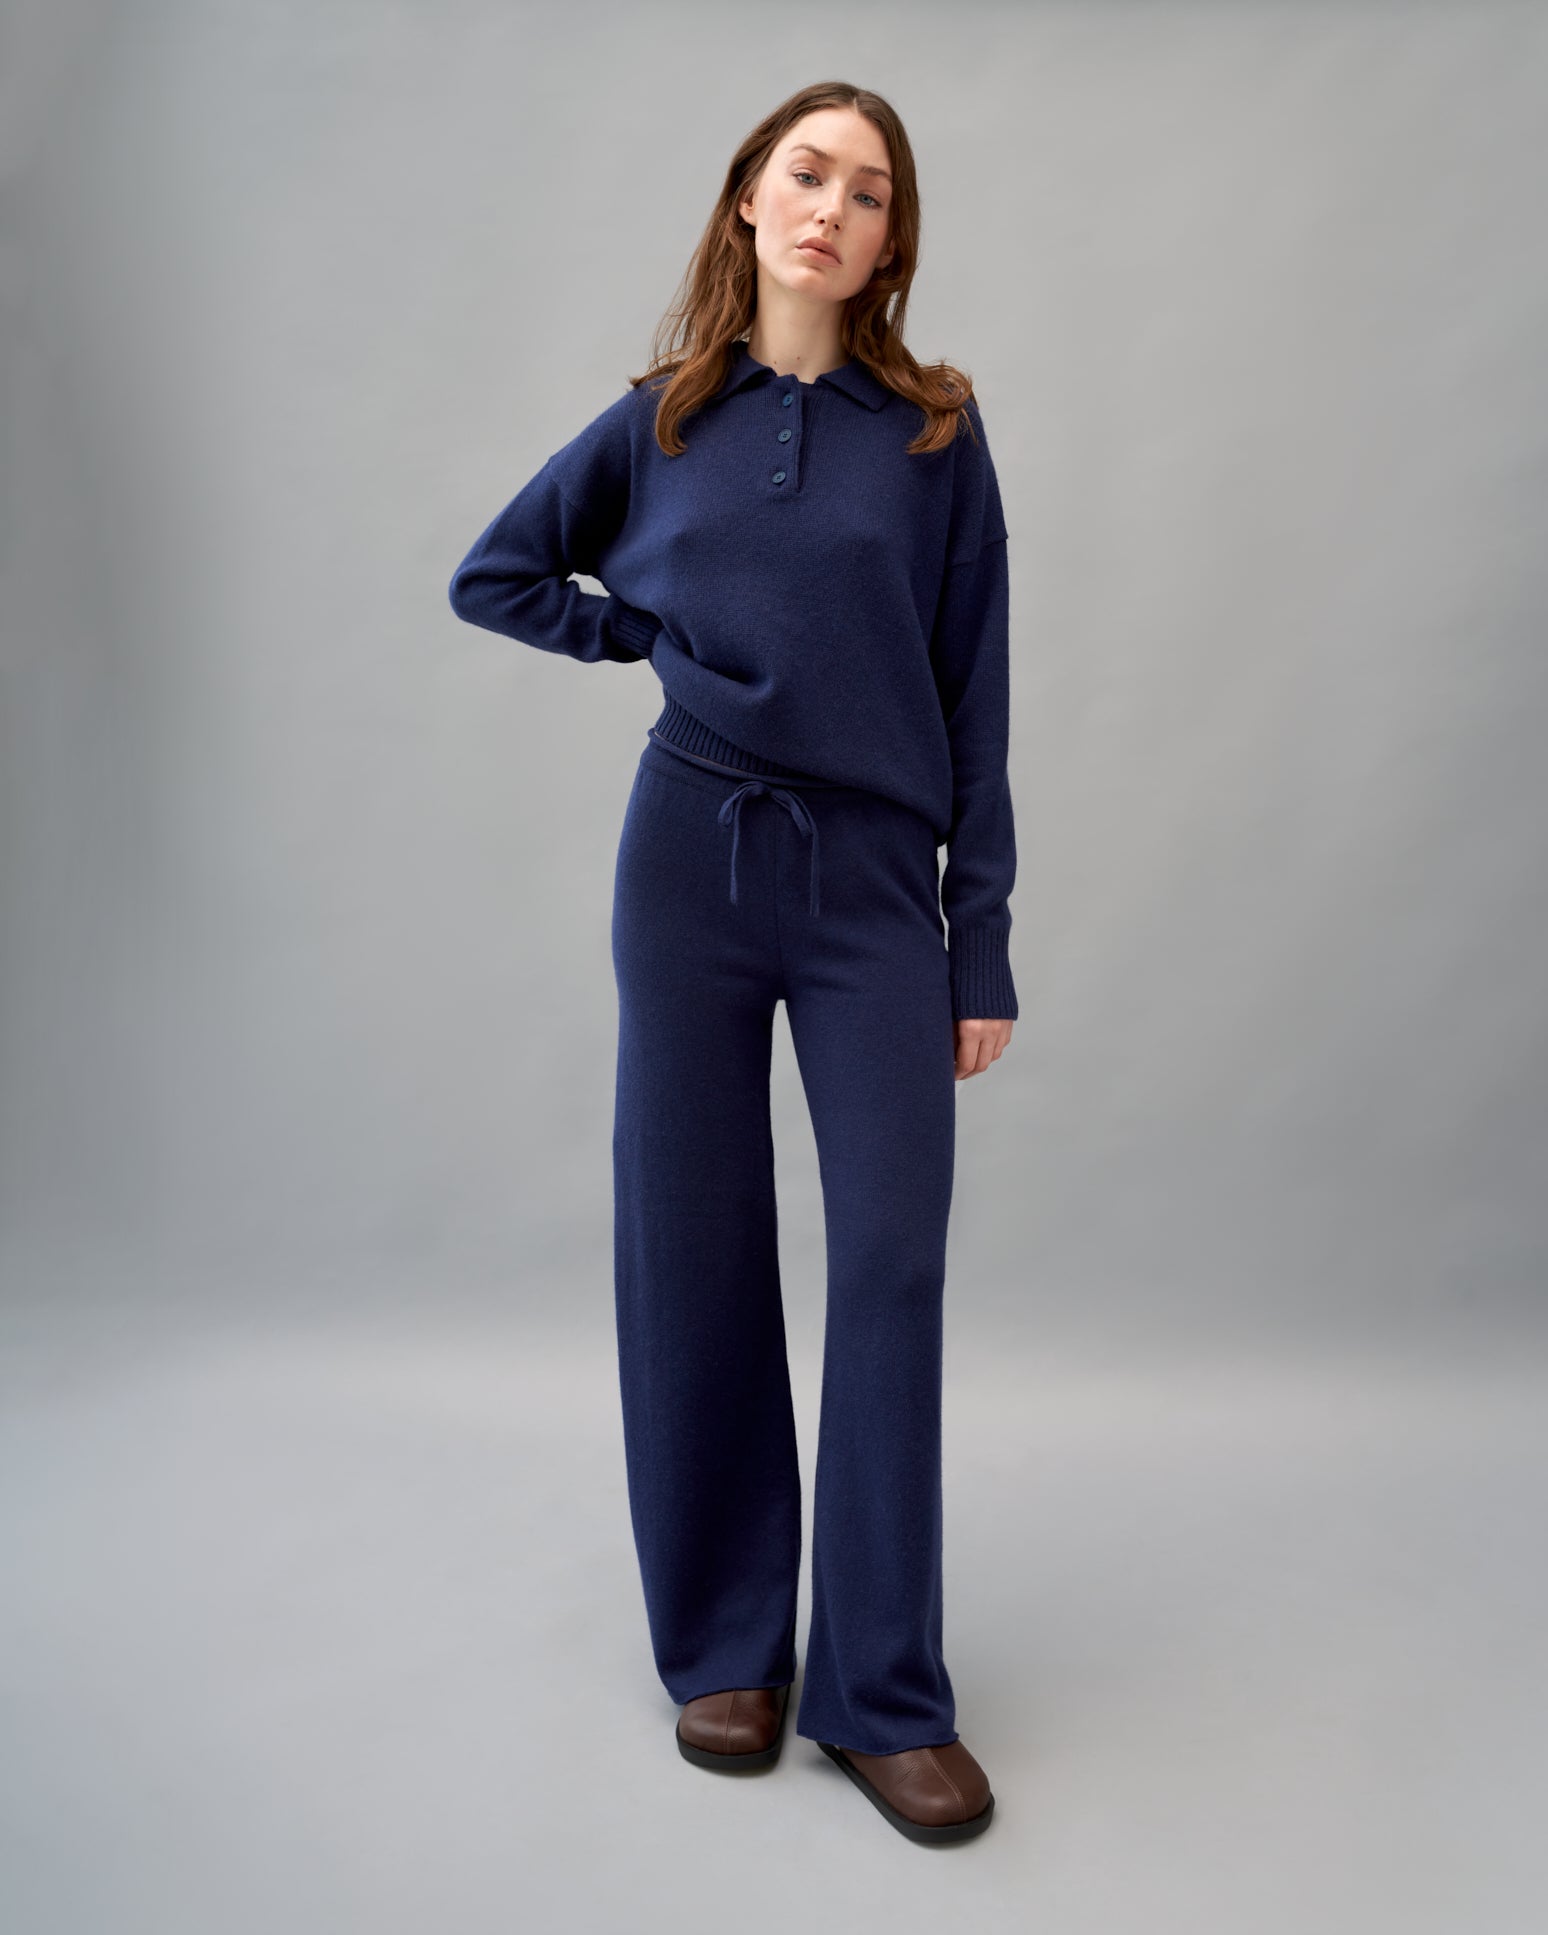 Blue knitted pants with cashmere addition KATSURINA + JUL